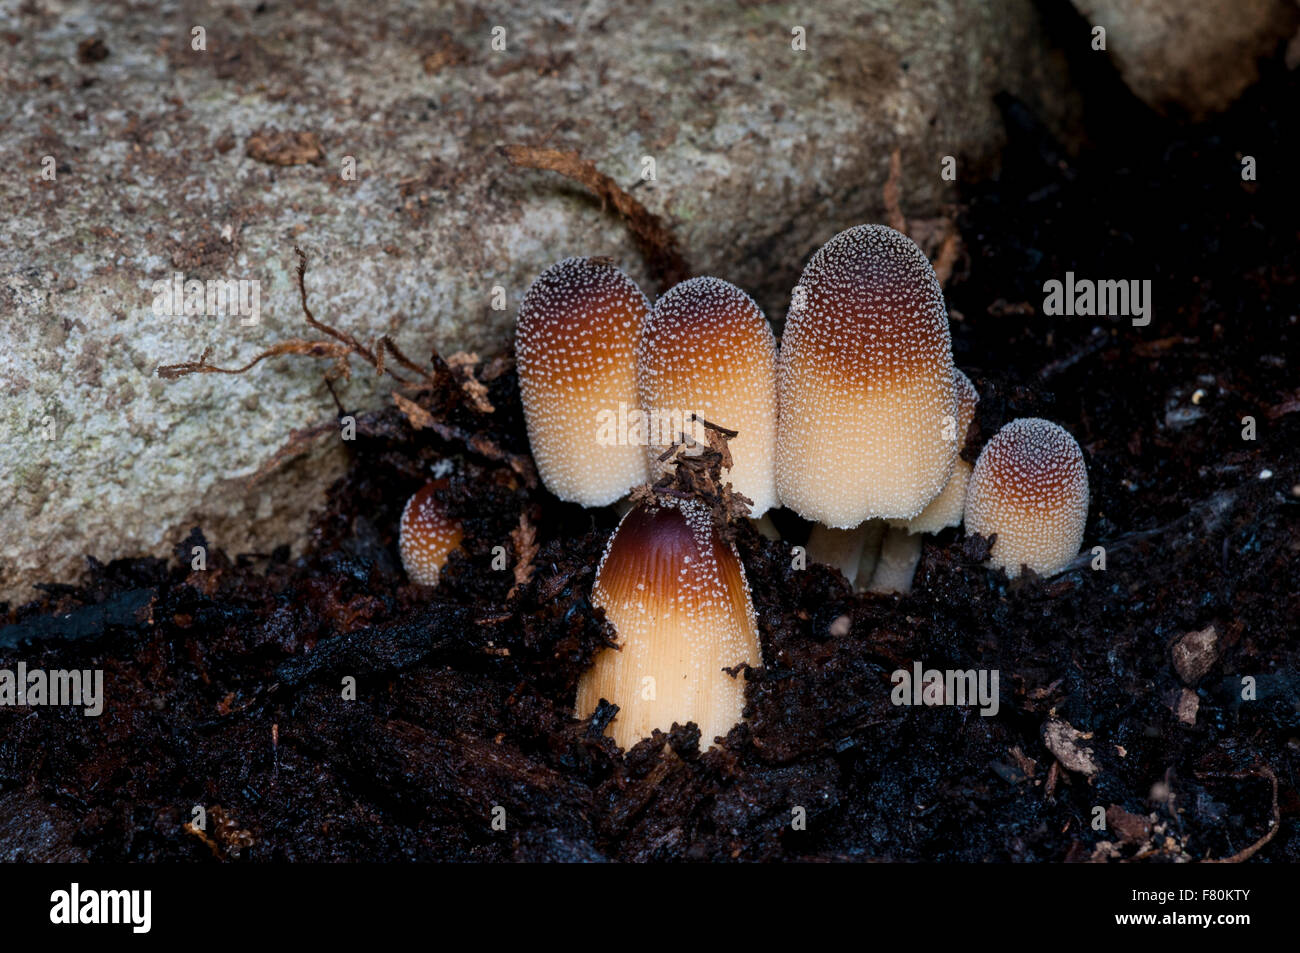 A small troop of glistening inkcaps (Coprinellus micaceus) growing on Ingleborough in the Yorkshire Dales National Park, North Y Stock Photo